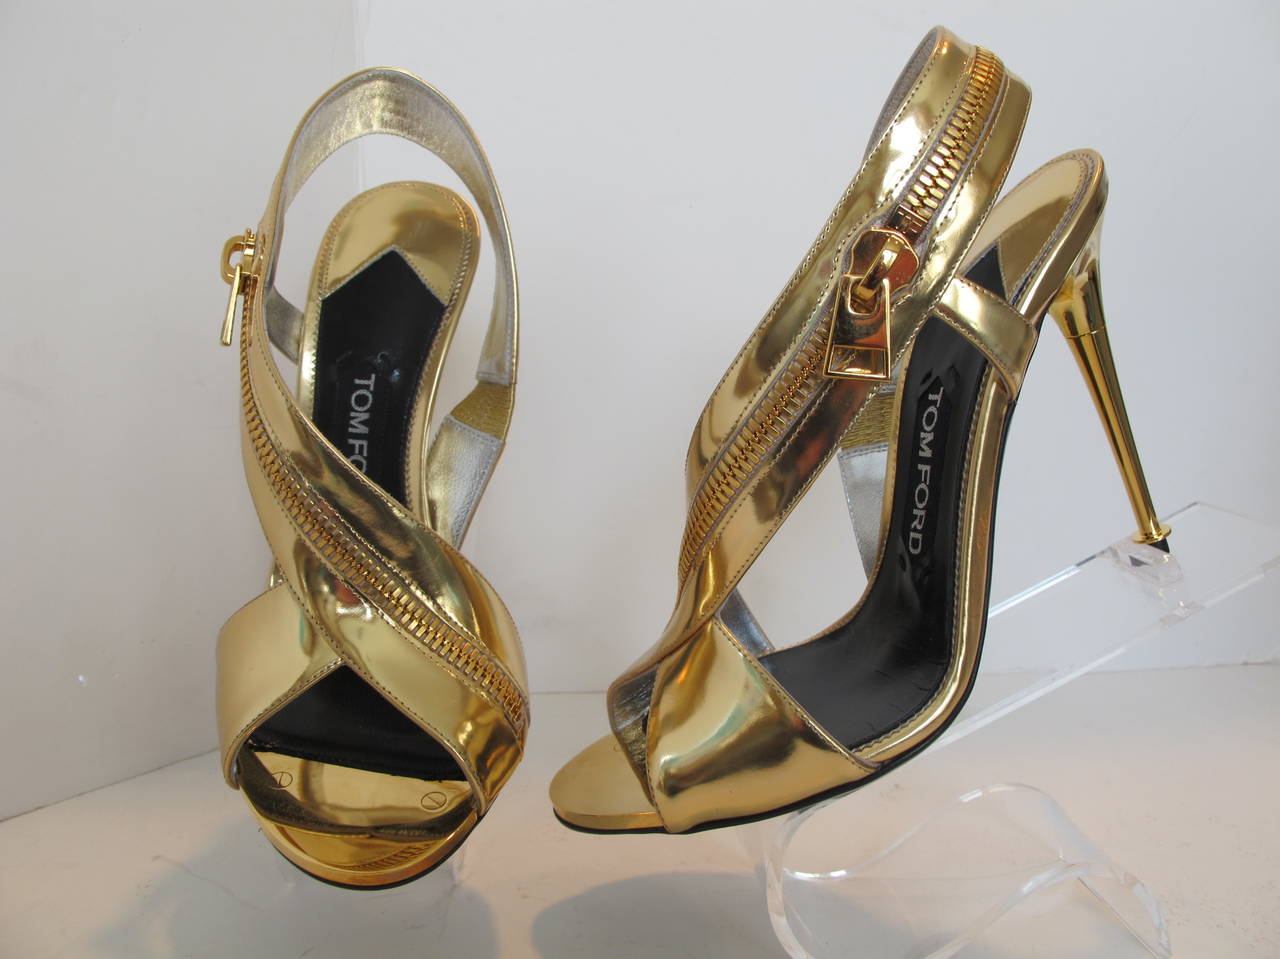 Tom Ford Gold Sling Back Sandal with Wrap Around Zipper is perfect for day or evening. There is a 1.375 inch metal piece with two inset screws at the toe. Heel measures 4.5 inches.